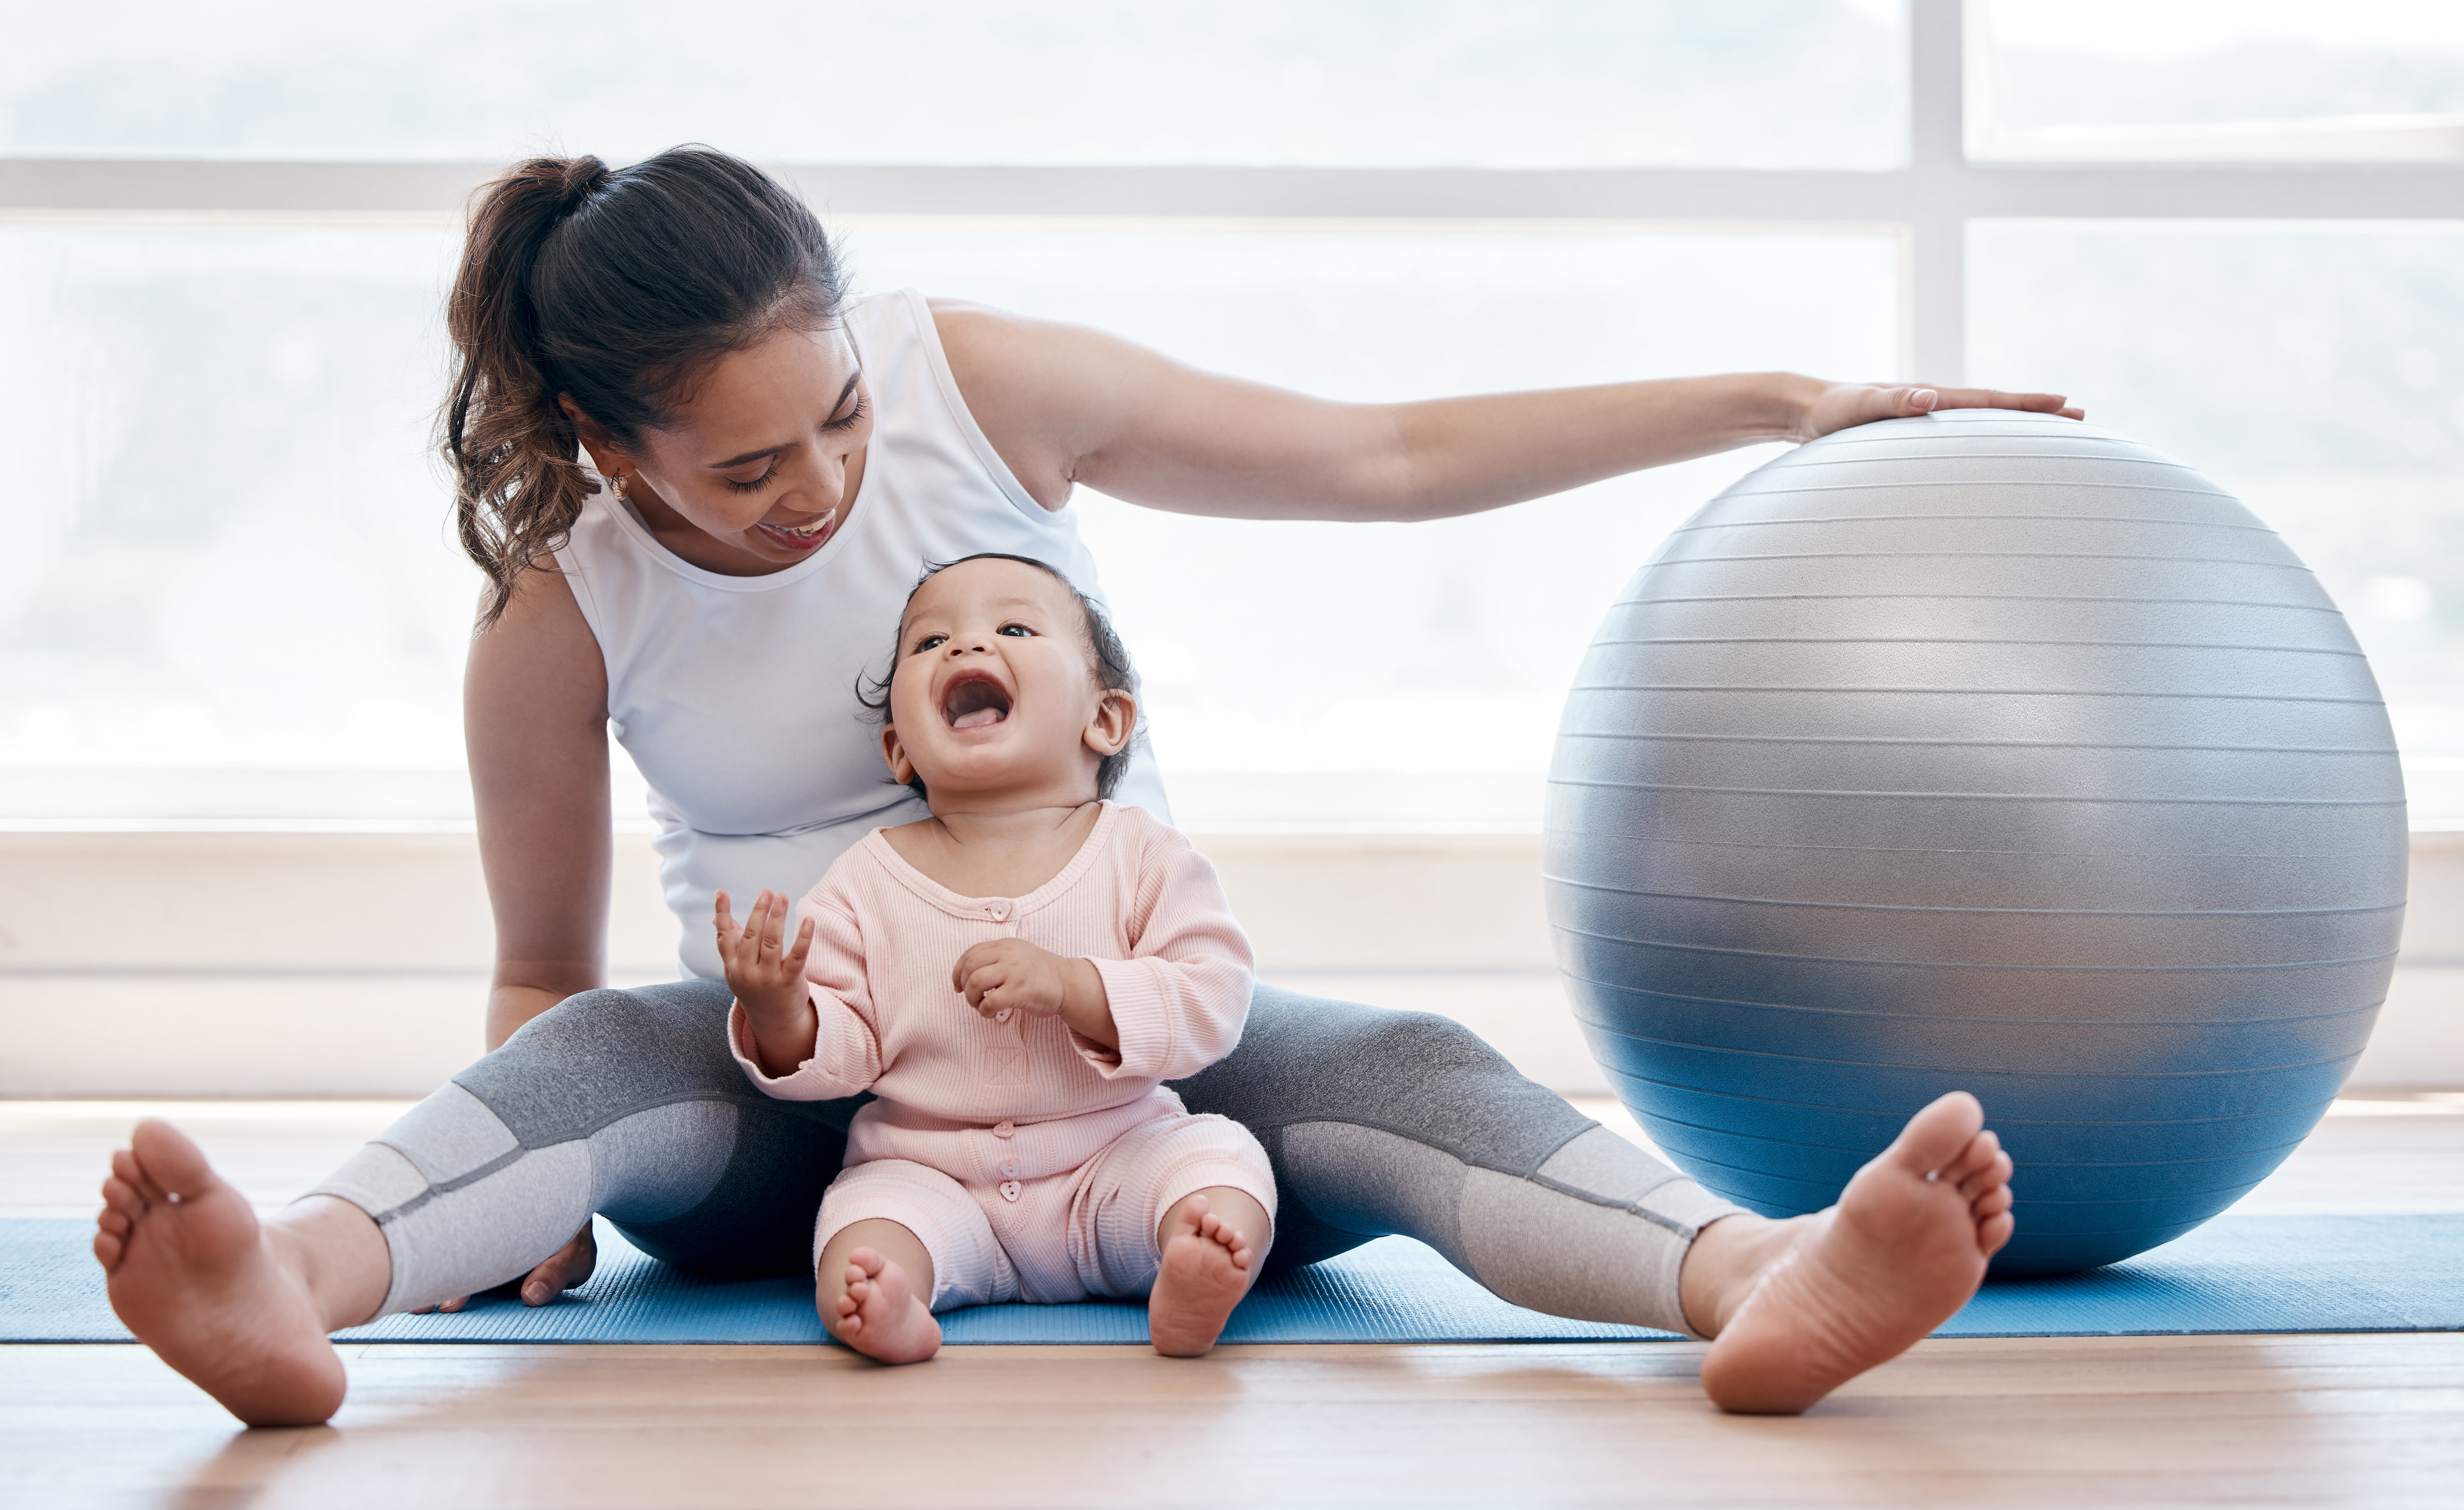 Are women who don't have kids more physically active? What the latest health studies say about exercise, anger and more.